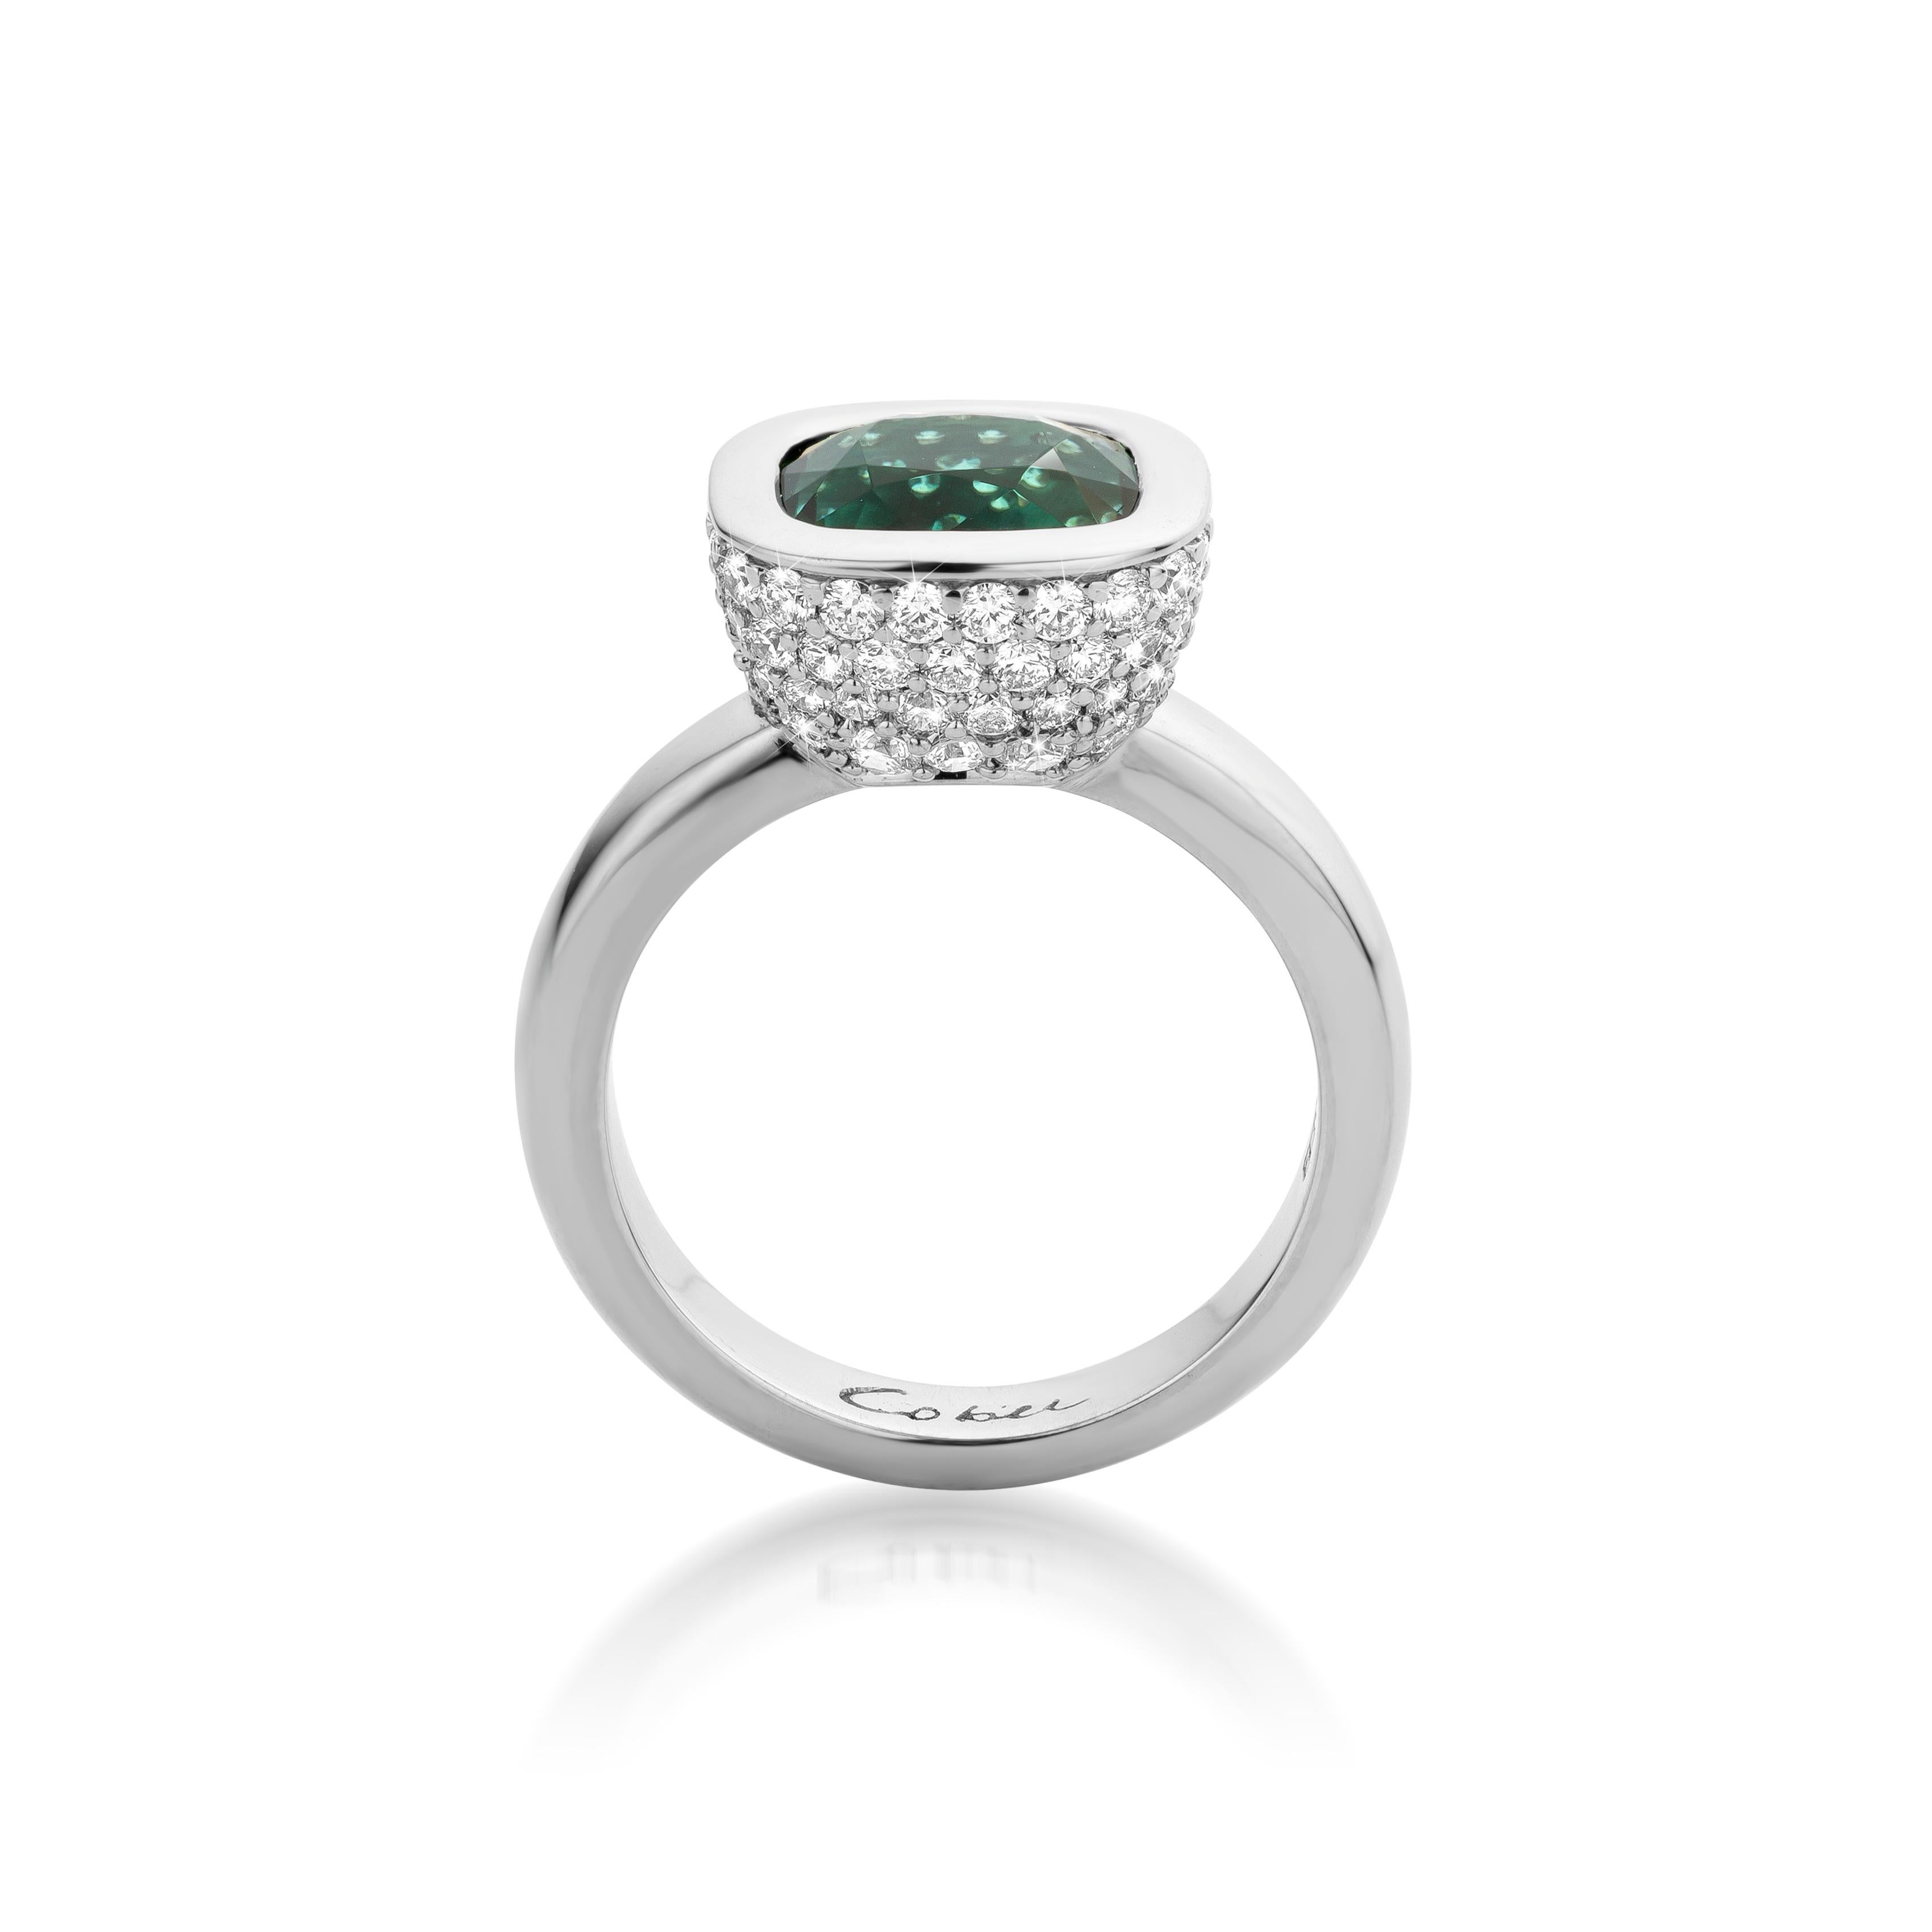 This is a 18 Carat white gold ring with very clear and vivid green Tourmaline. the cup in which the Tourmaline is set has full pavé Diamonds.
Cober designs exclusive wedding rings, jewels and watches, all of them made by hand.
“The most distinctive